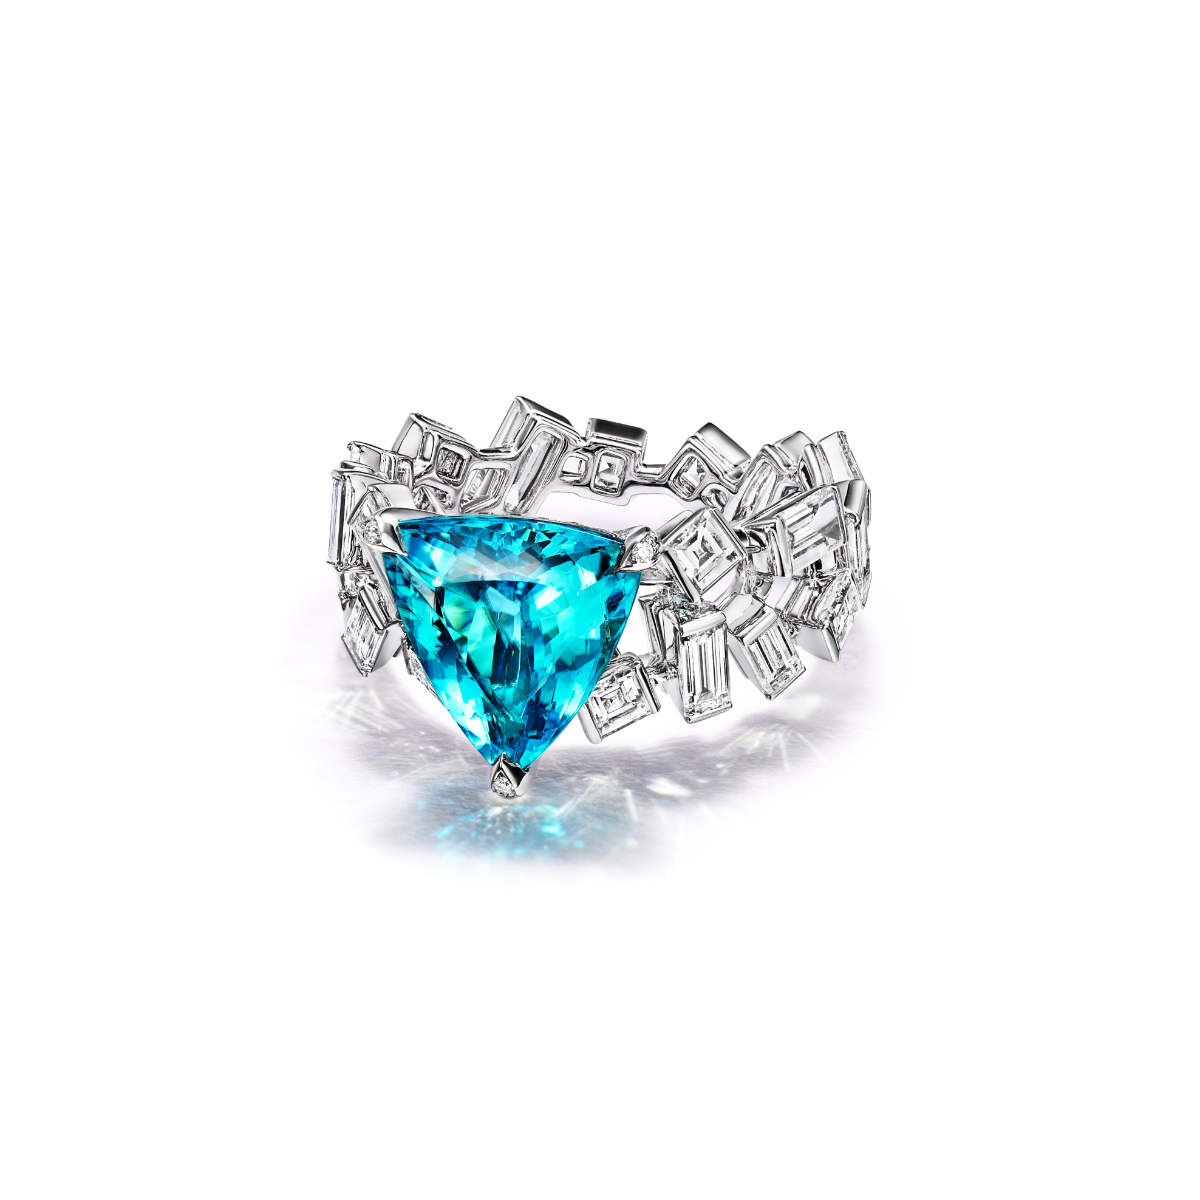 Tiffany & Co. Introduces The Fall Expression Of Blue Book 2023: Out Of The Blue